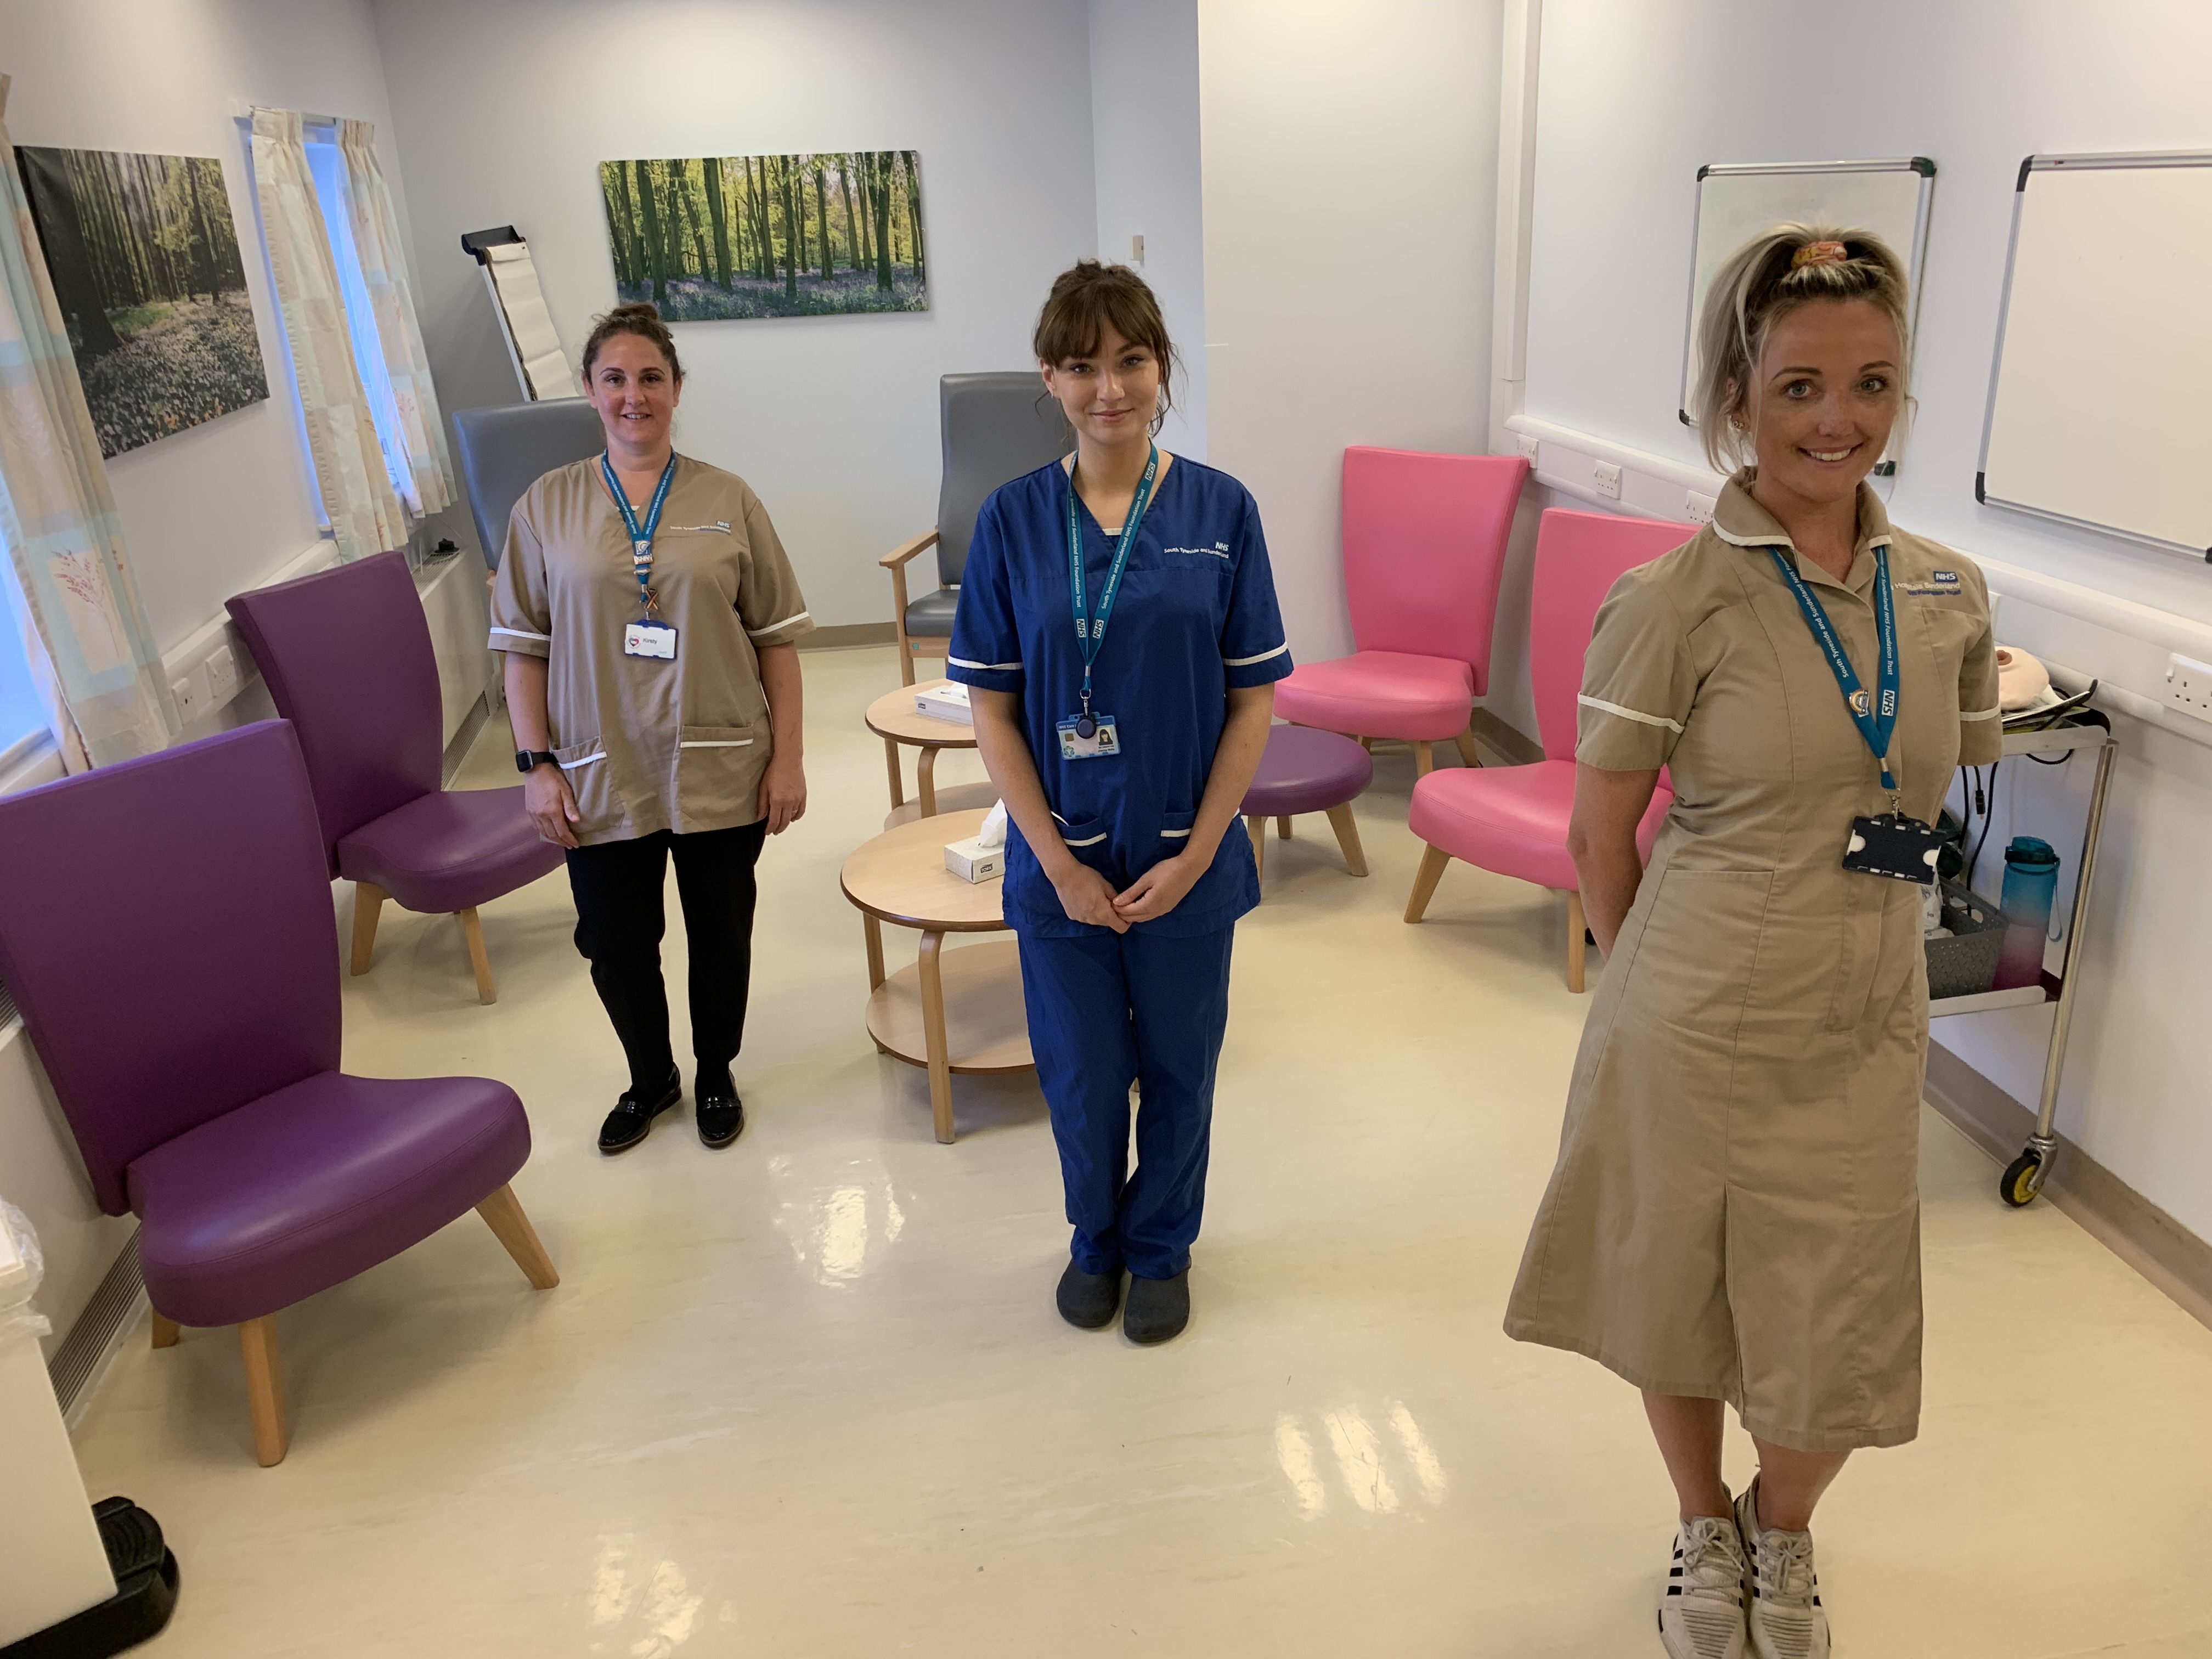 Midwife Joanna Wylie, centre, leads the classes with support from her team including Maternity Health Advisors Kirsty Lamb, left, and Julie Dodd, right..jpg